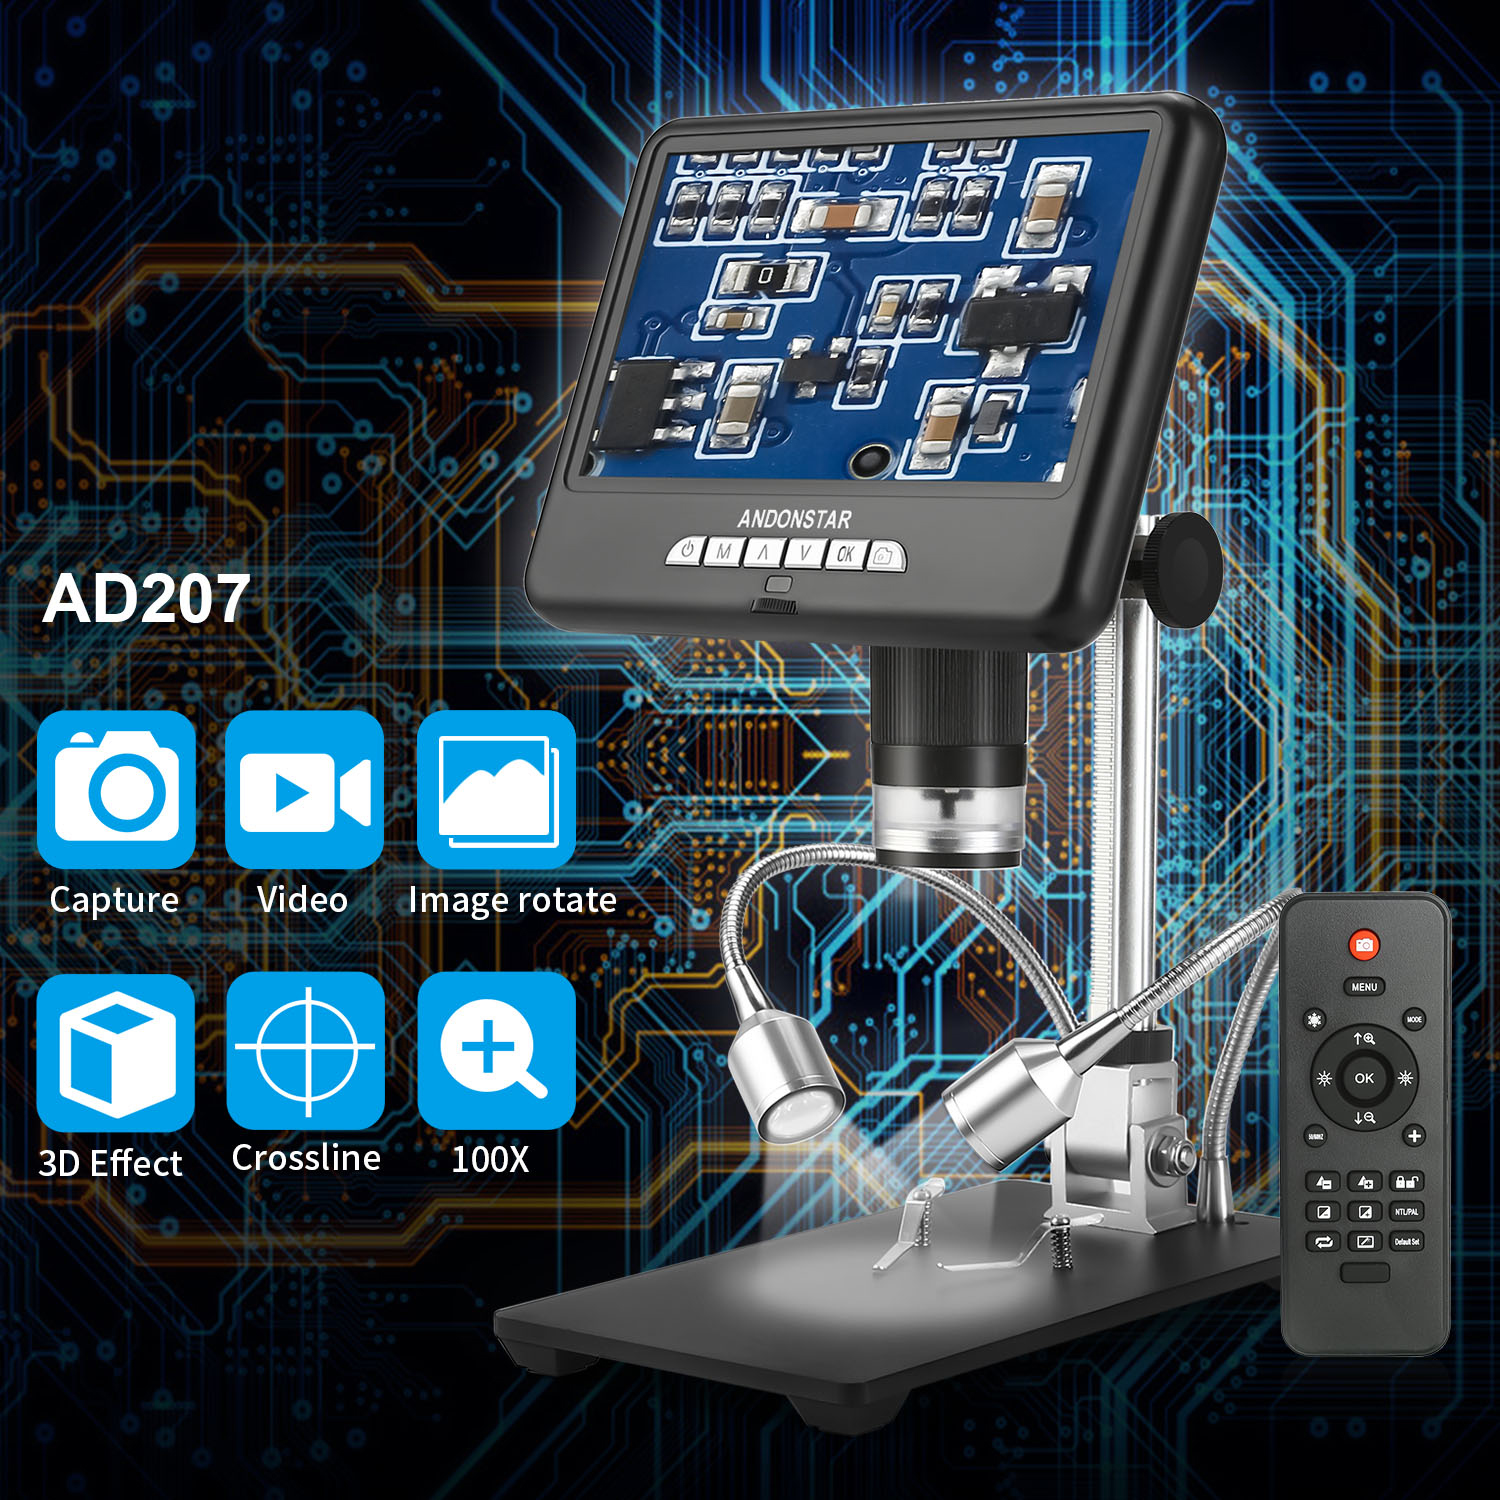 Andonstar-AD207-7-inch-3D-Digital-Microscope-Soldering-Tool-for-PhonePCBSMD-Repair-with-Image-Rotate-1584320-2